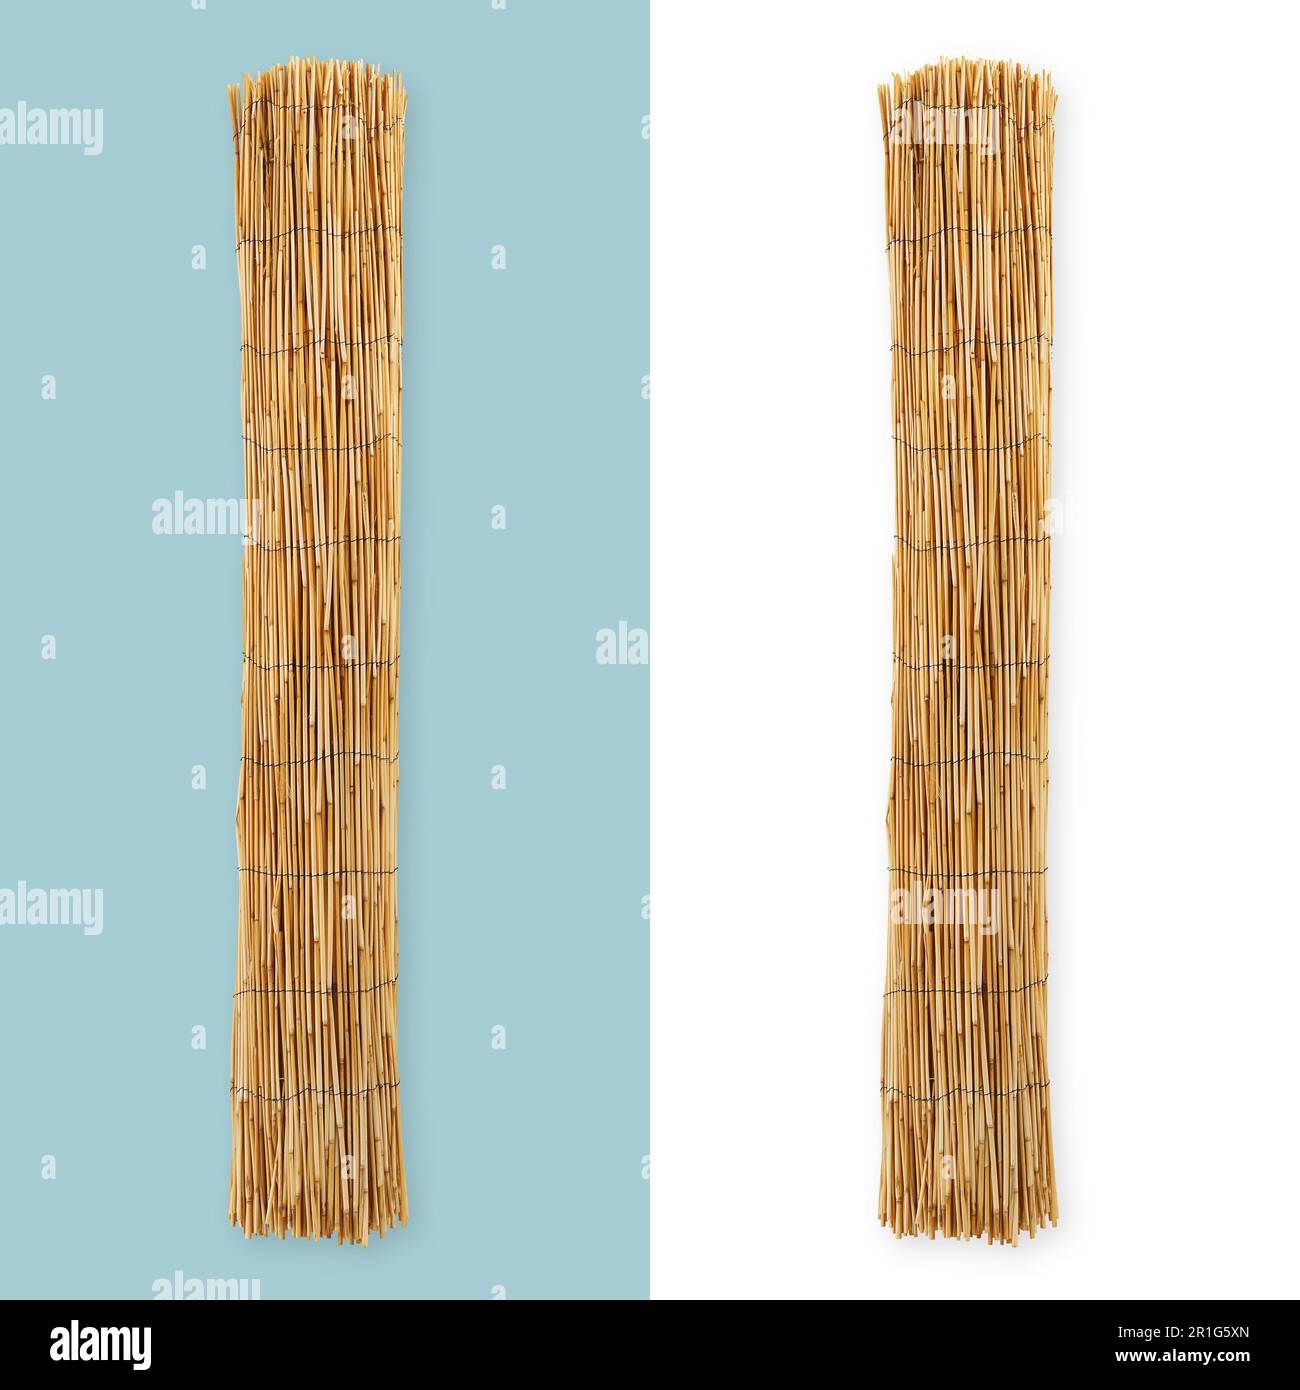 Rolled up bamboo curtain sun protection. Top view isolated on white and light blue background. Patio blind sunscreen. Stock Photo